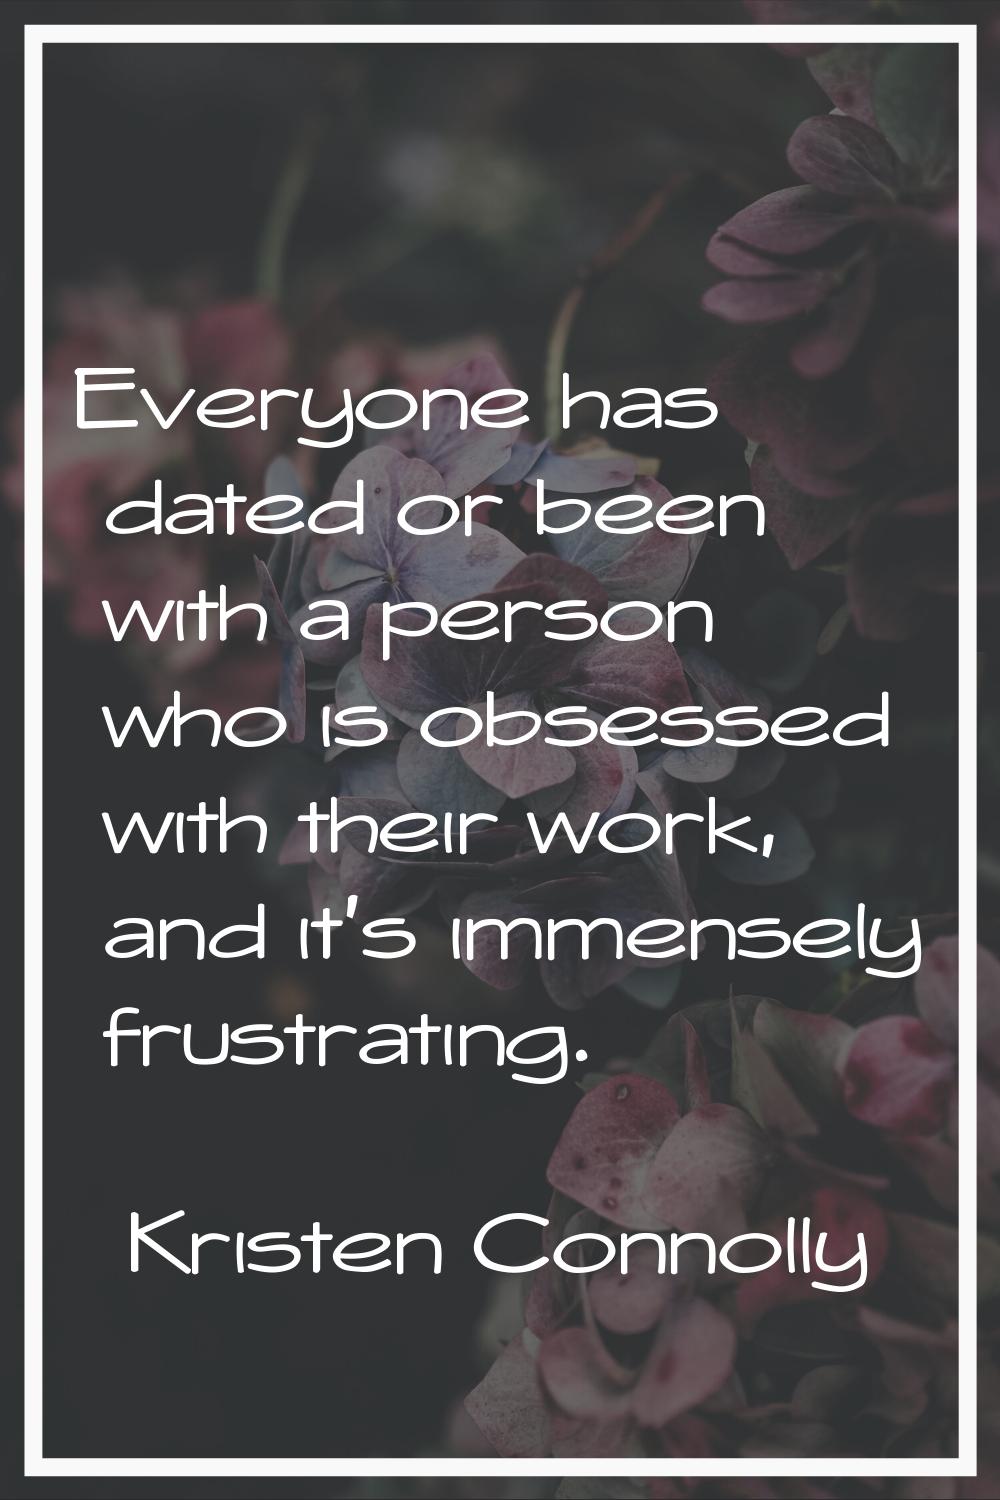 Everyone has dated or been with a person who is obsessed with their work, and it's immensely frustr